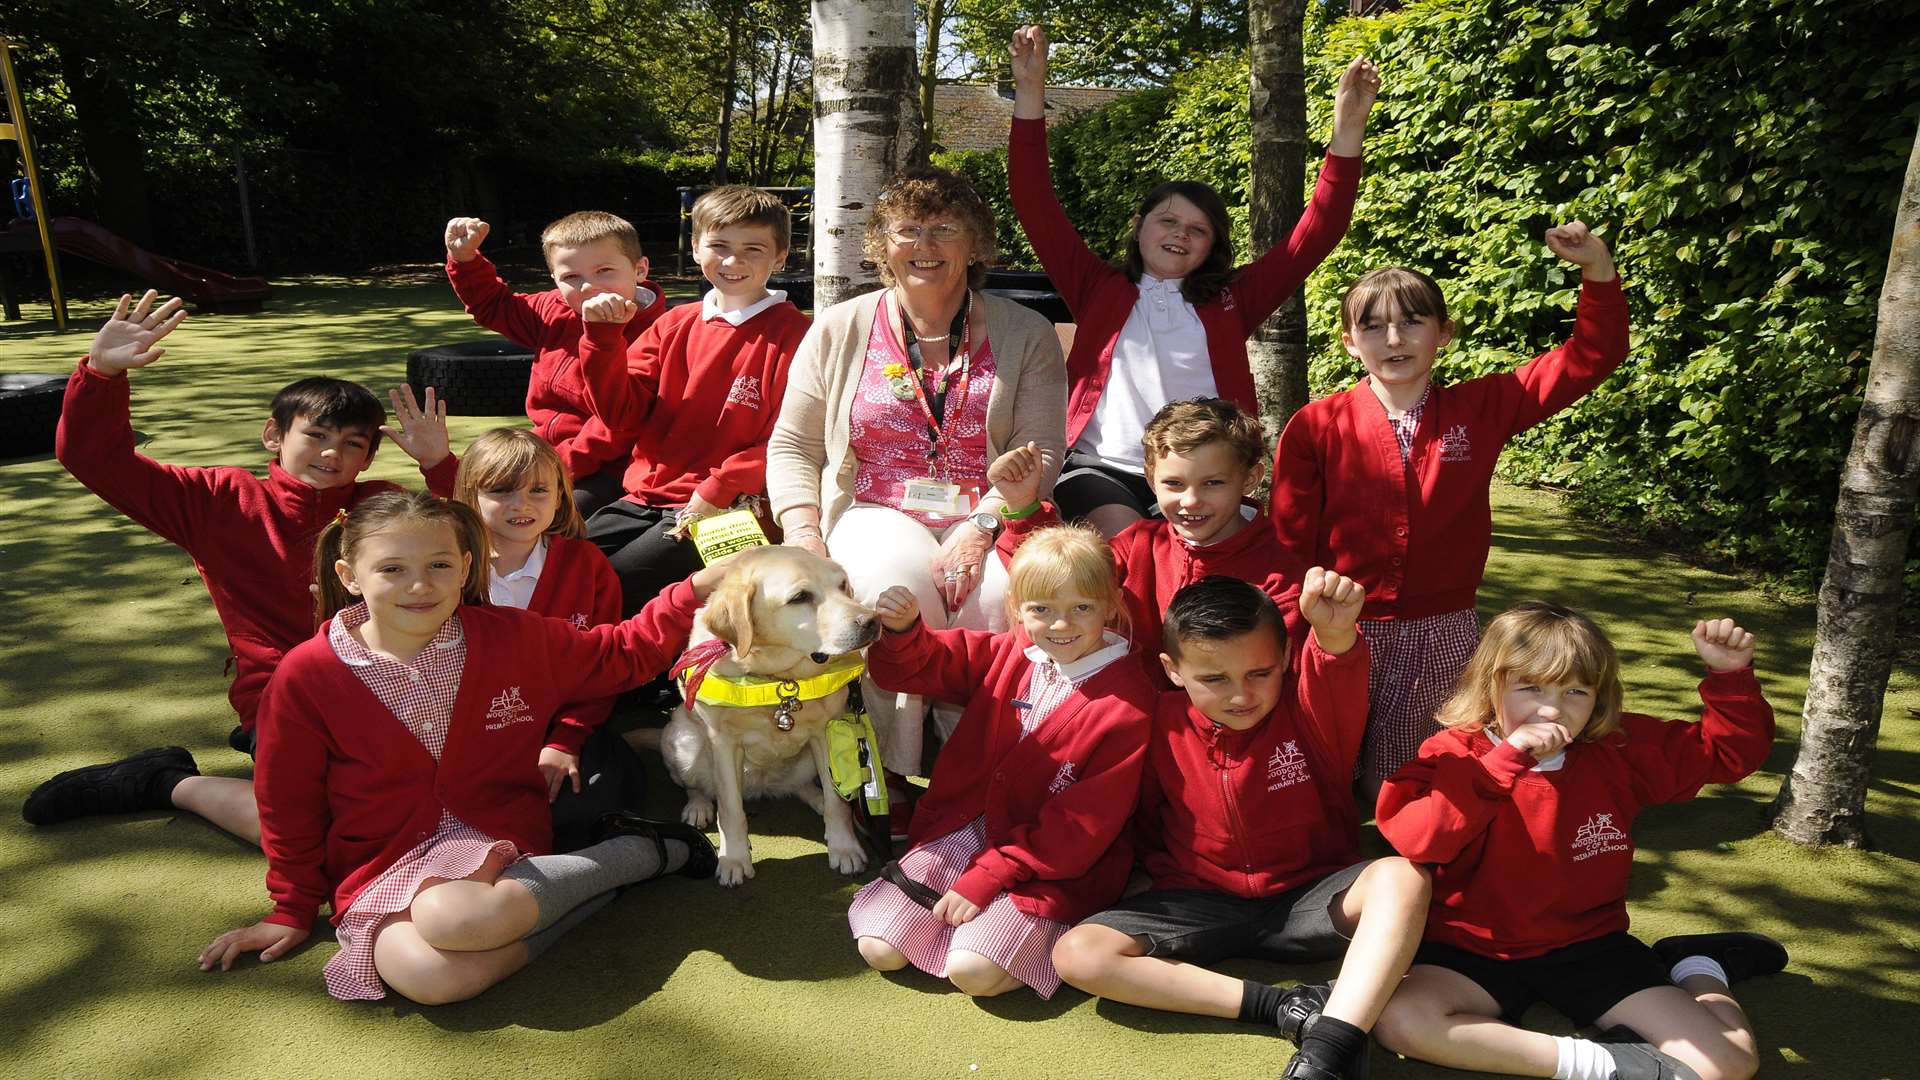 Pat Marshall with her guide dog Chloe and pupils from Woodchurch Primary School.